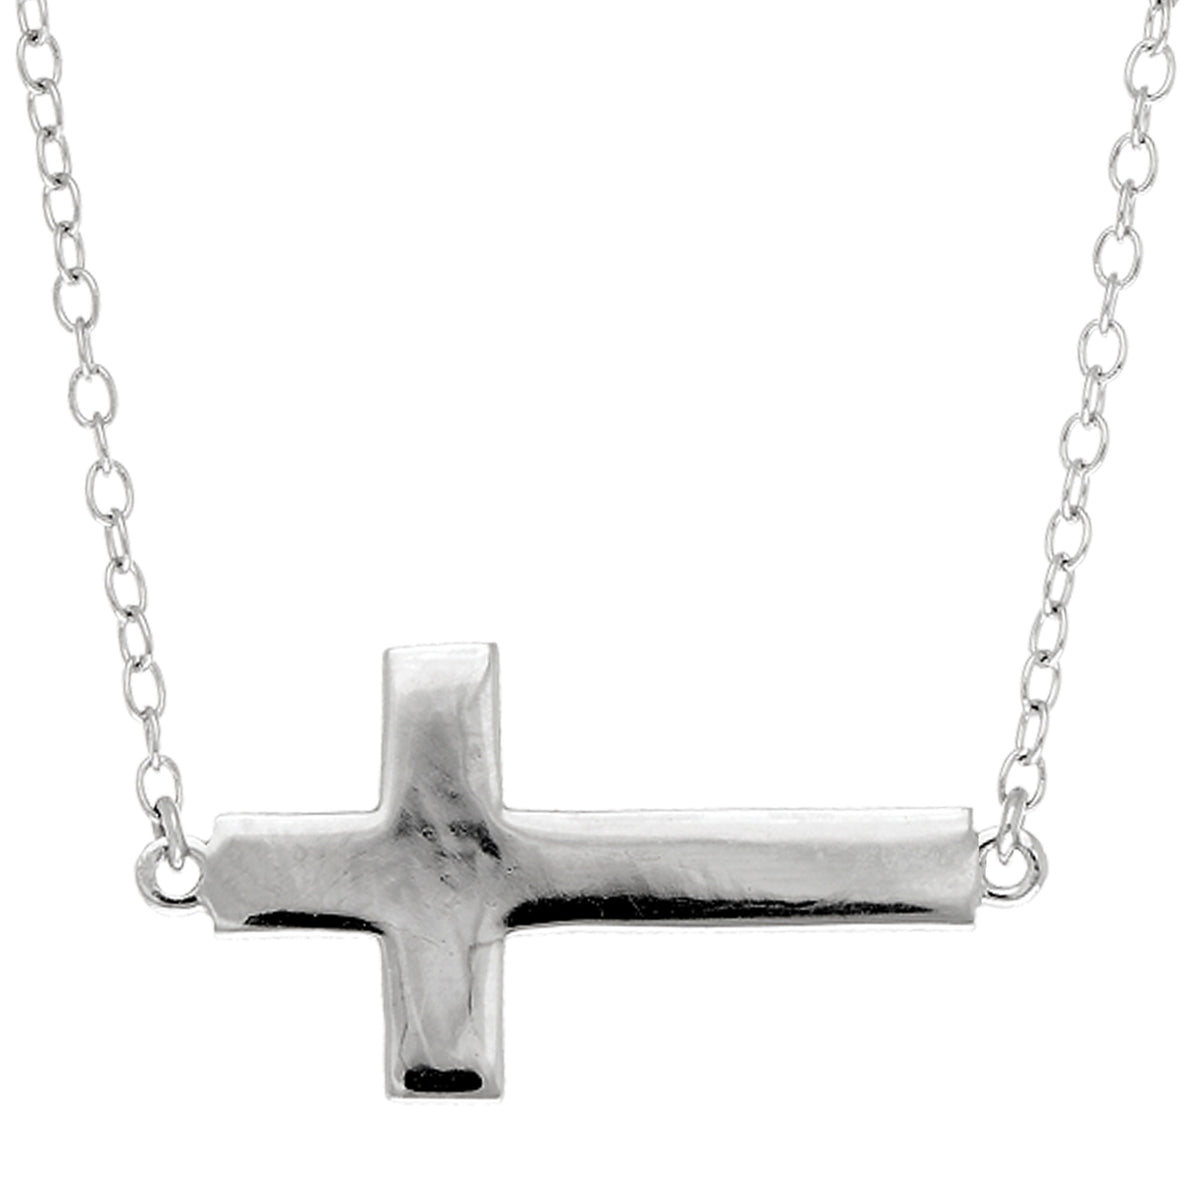 Sideways Cross Necklace In Rhodium Plated Sterling Silver - 18 Inches fine designer jewelry for men and women